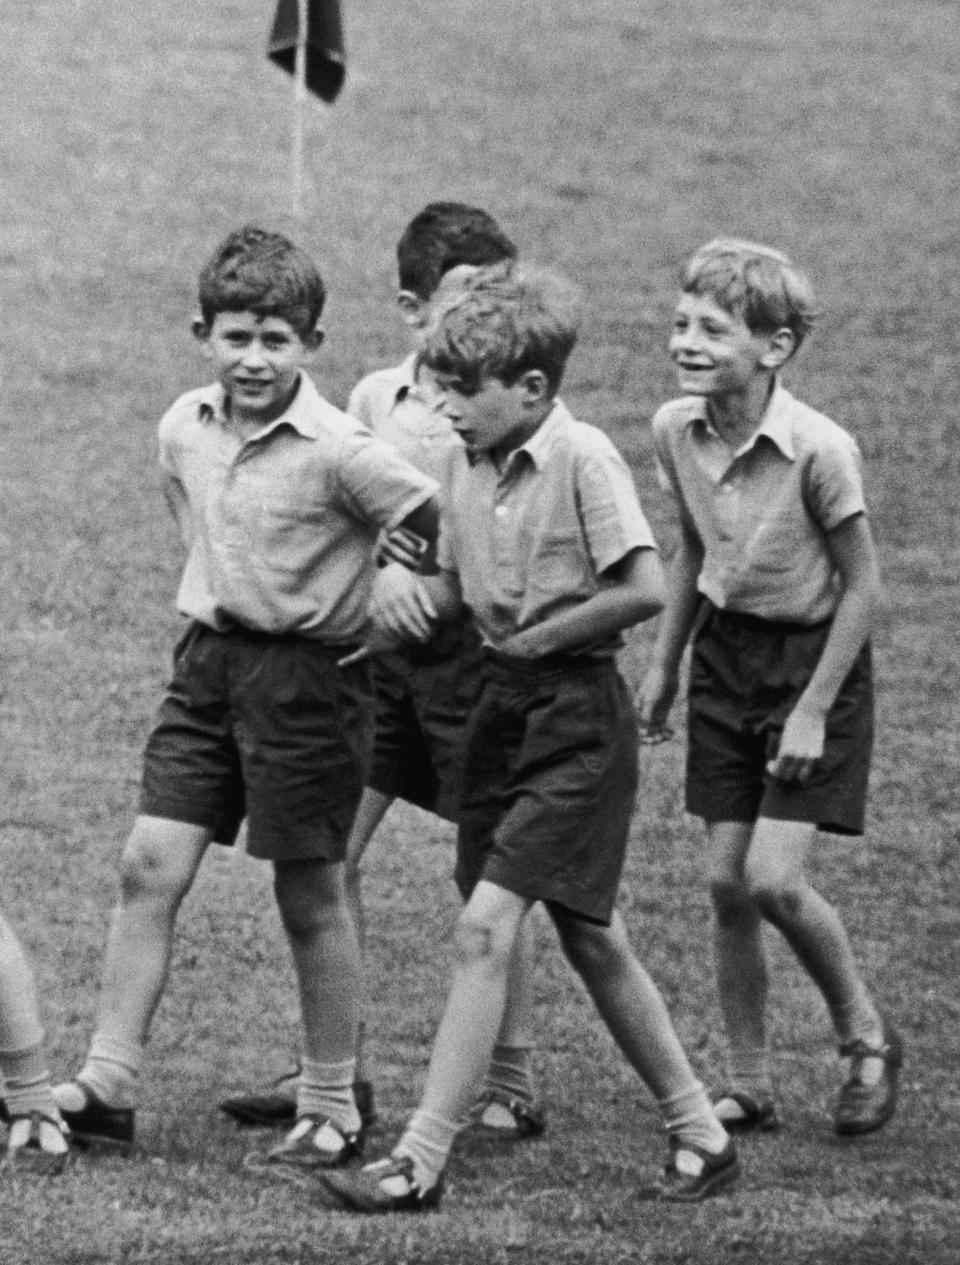 Prince Charles, Prince of Wales (left) with friends at prep school in England, 1957. (Photo by Hulton Archive/Getty Images)